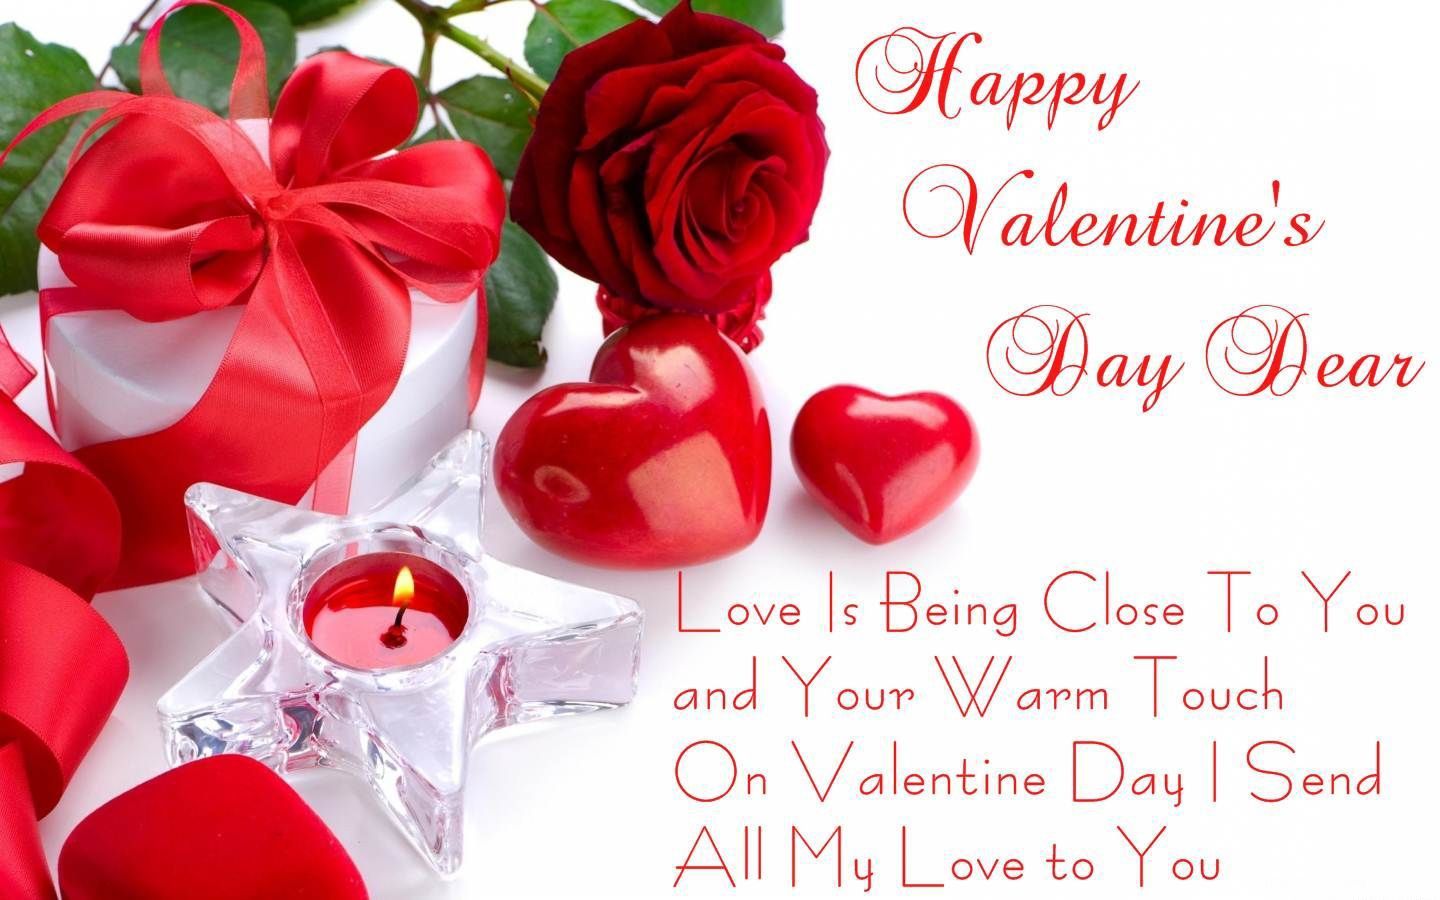 Valentines Day Quotes Image For Friends. Happy valentines day image, Valentines day wishes, Happy valentines day wishes